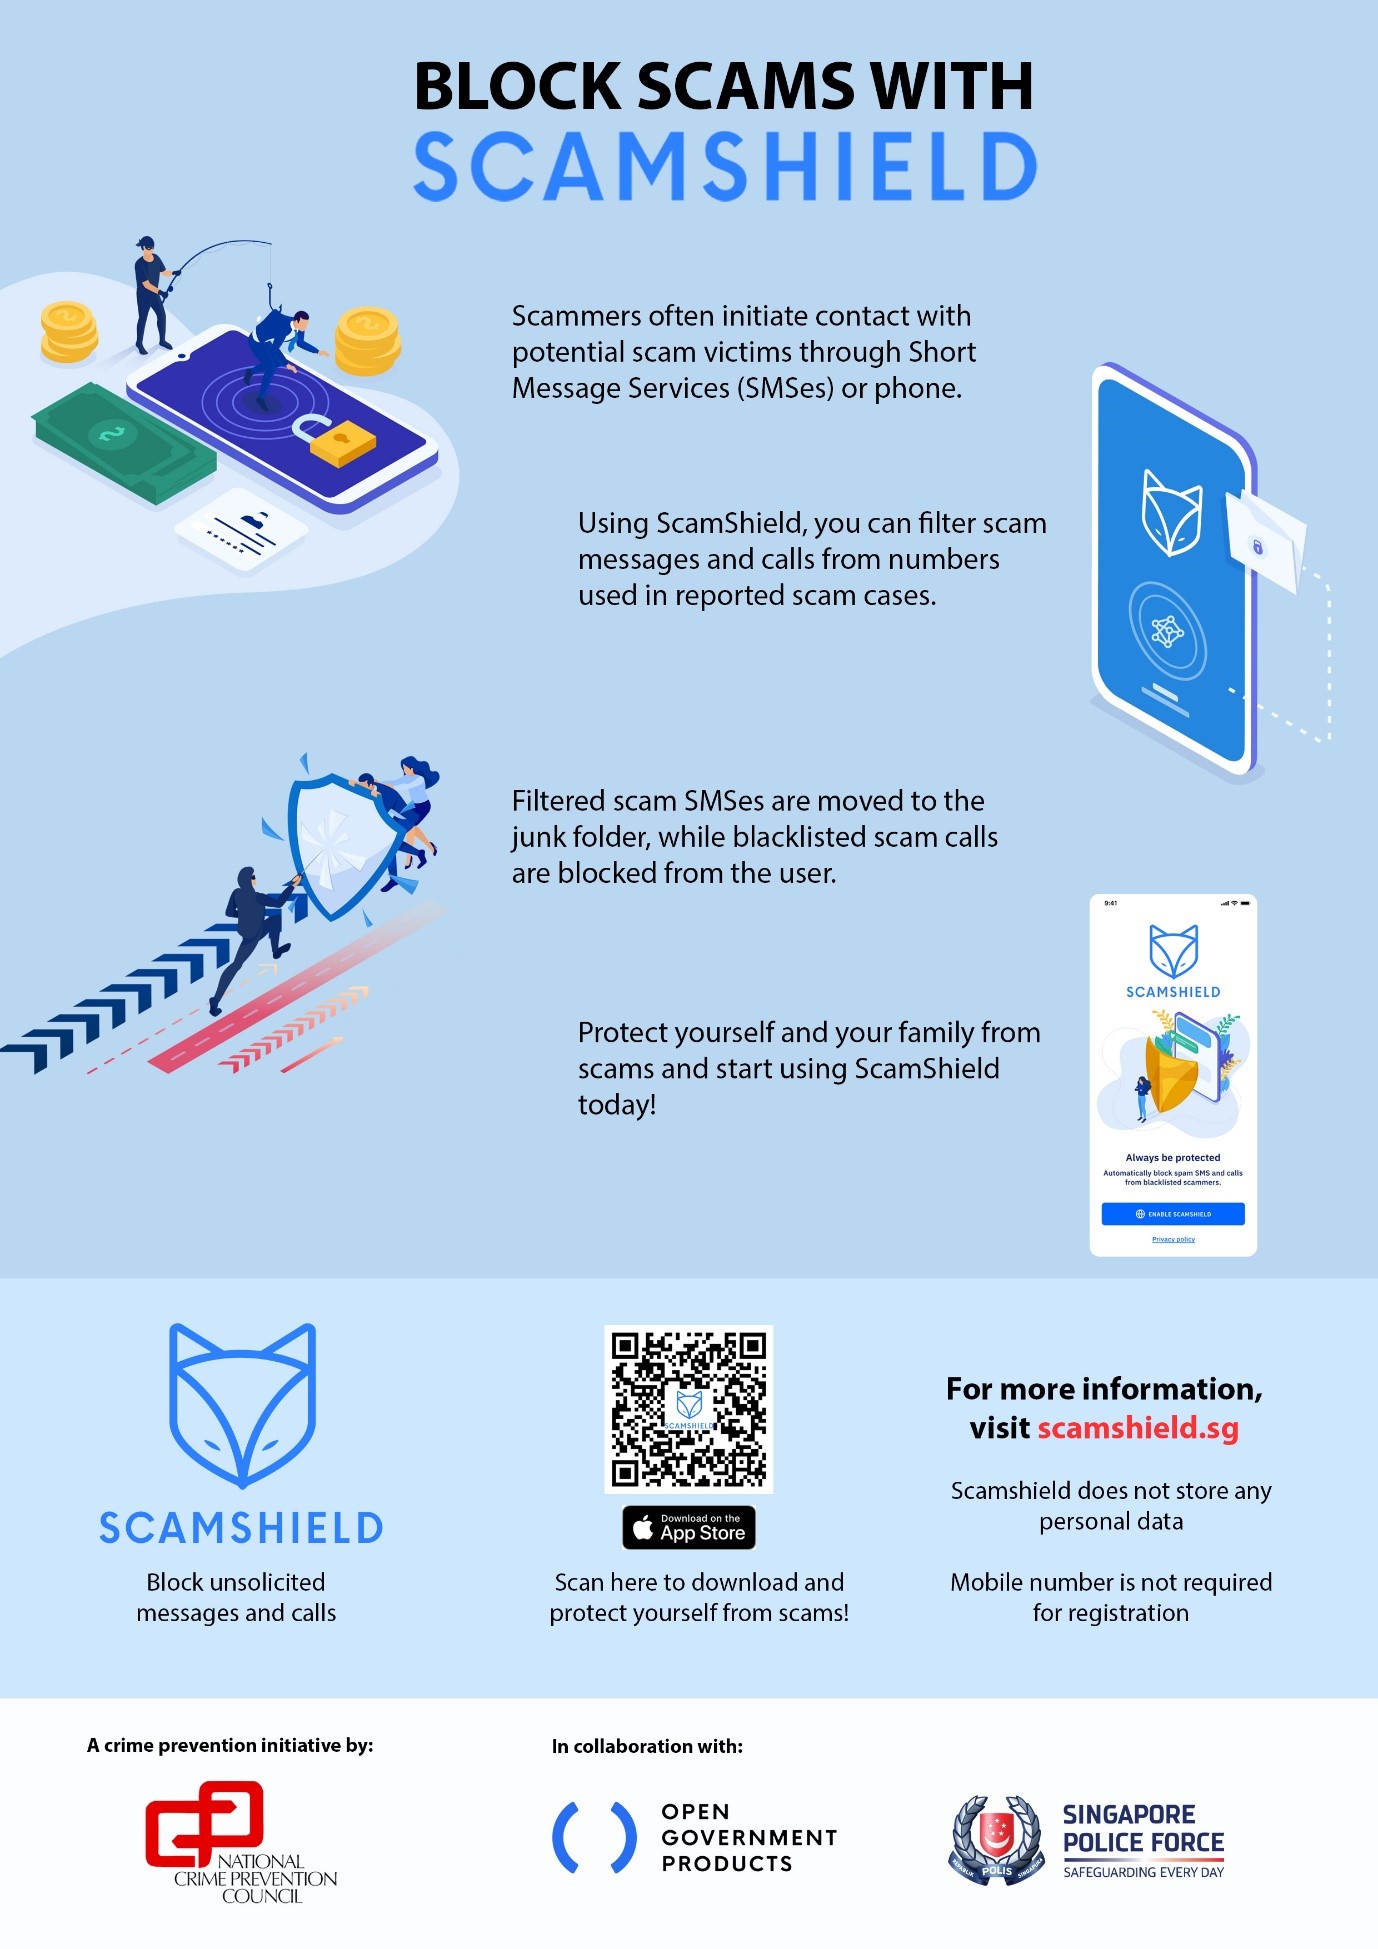 20201120_ncpc_fights_scams_with_new_scamshield_app_1